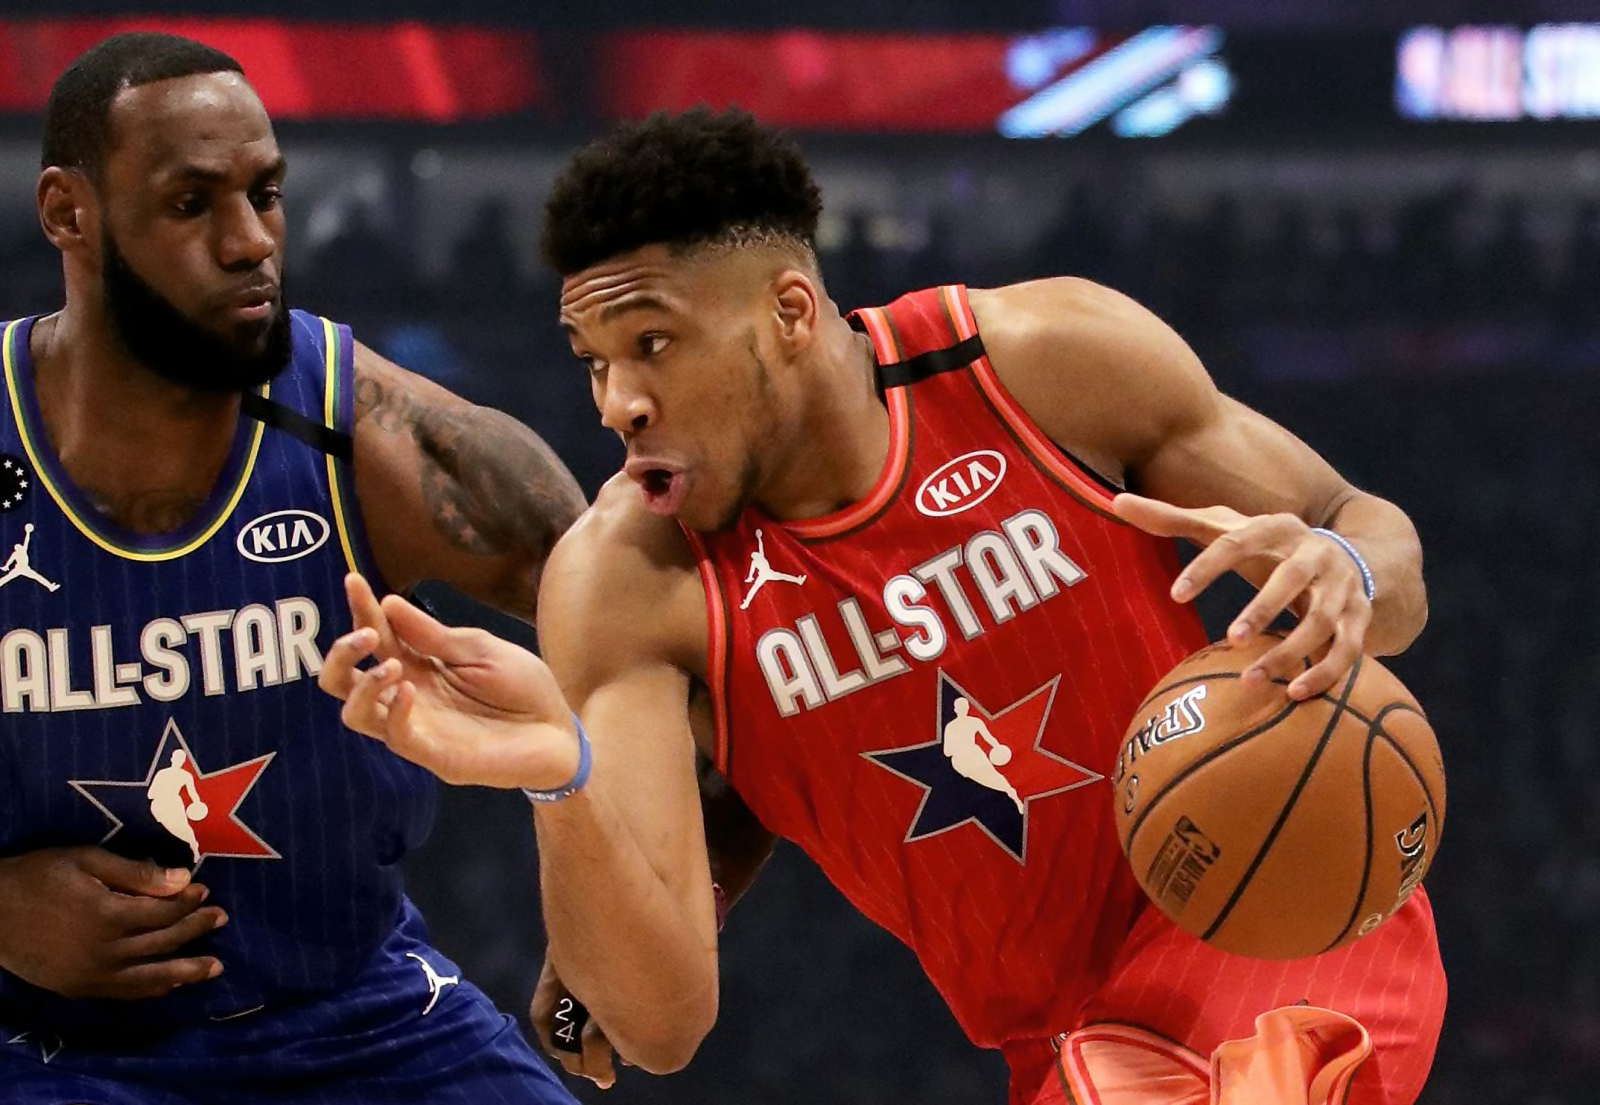 Grading each event from the NBA's 2020 AllStar weekend in Chicago